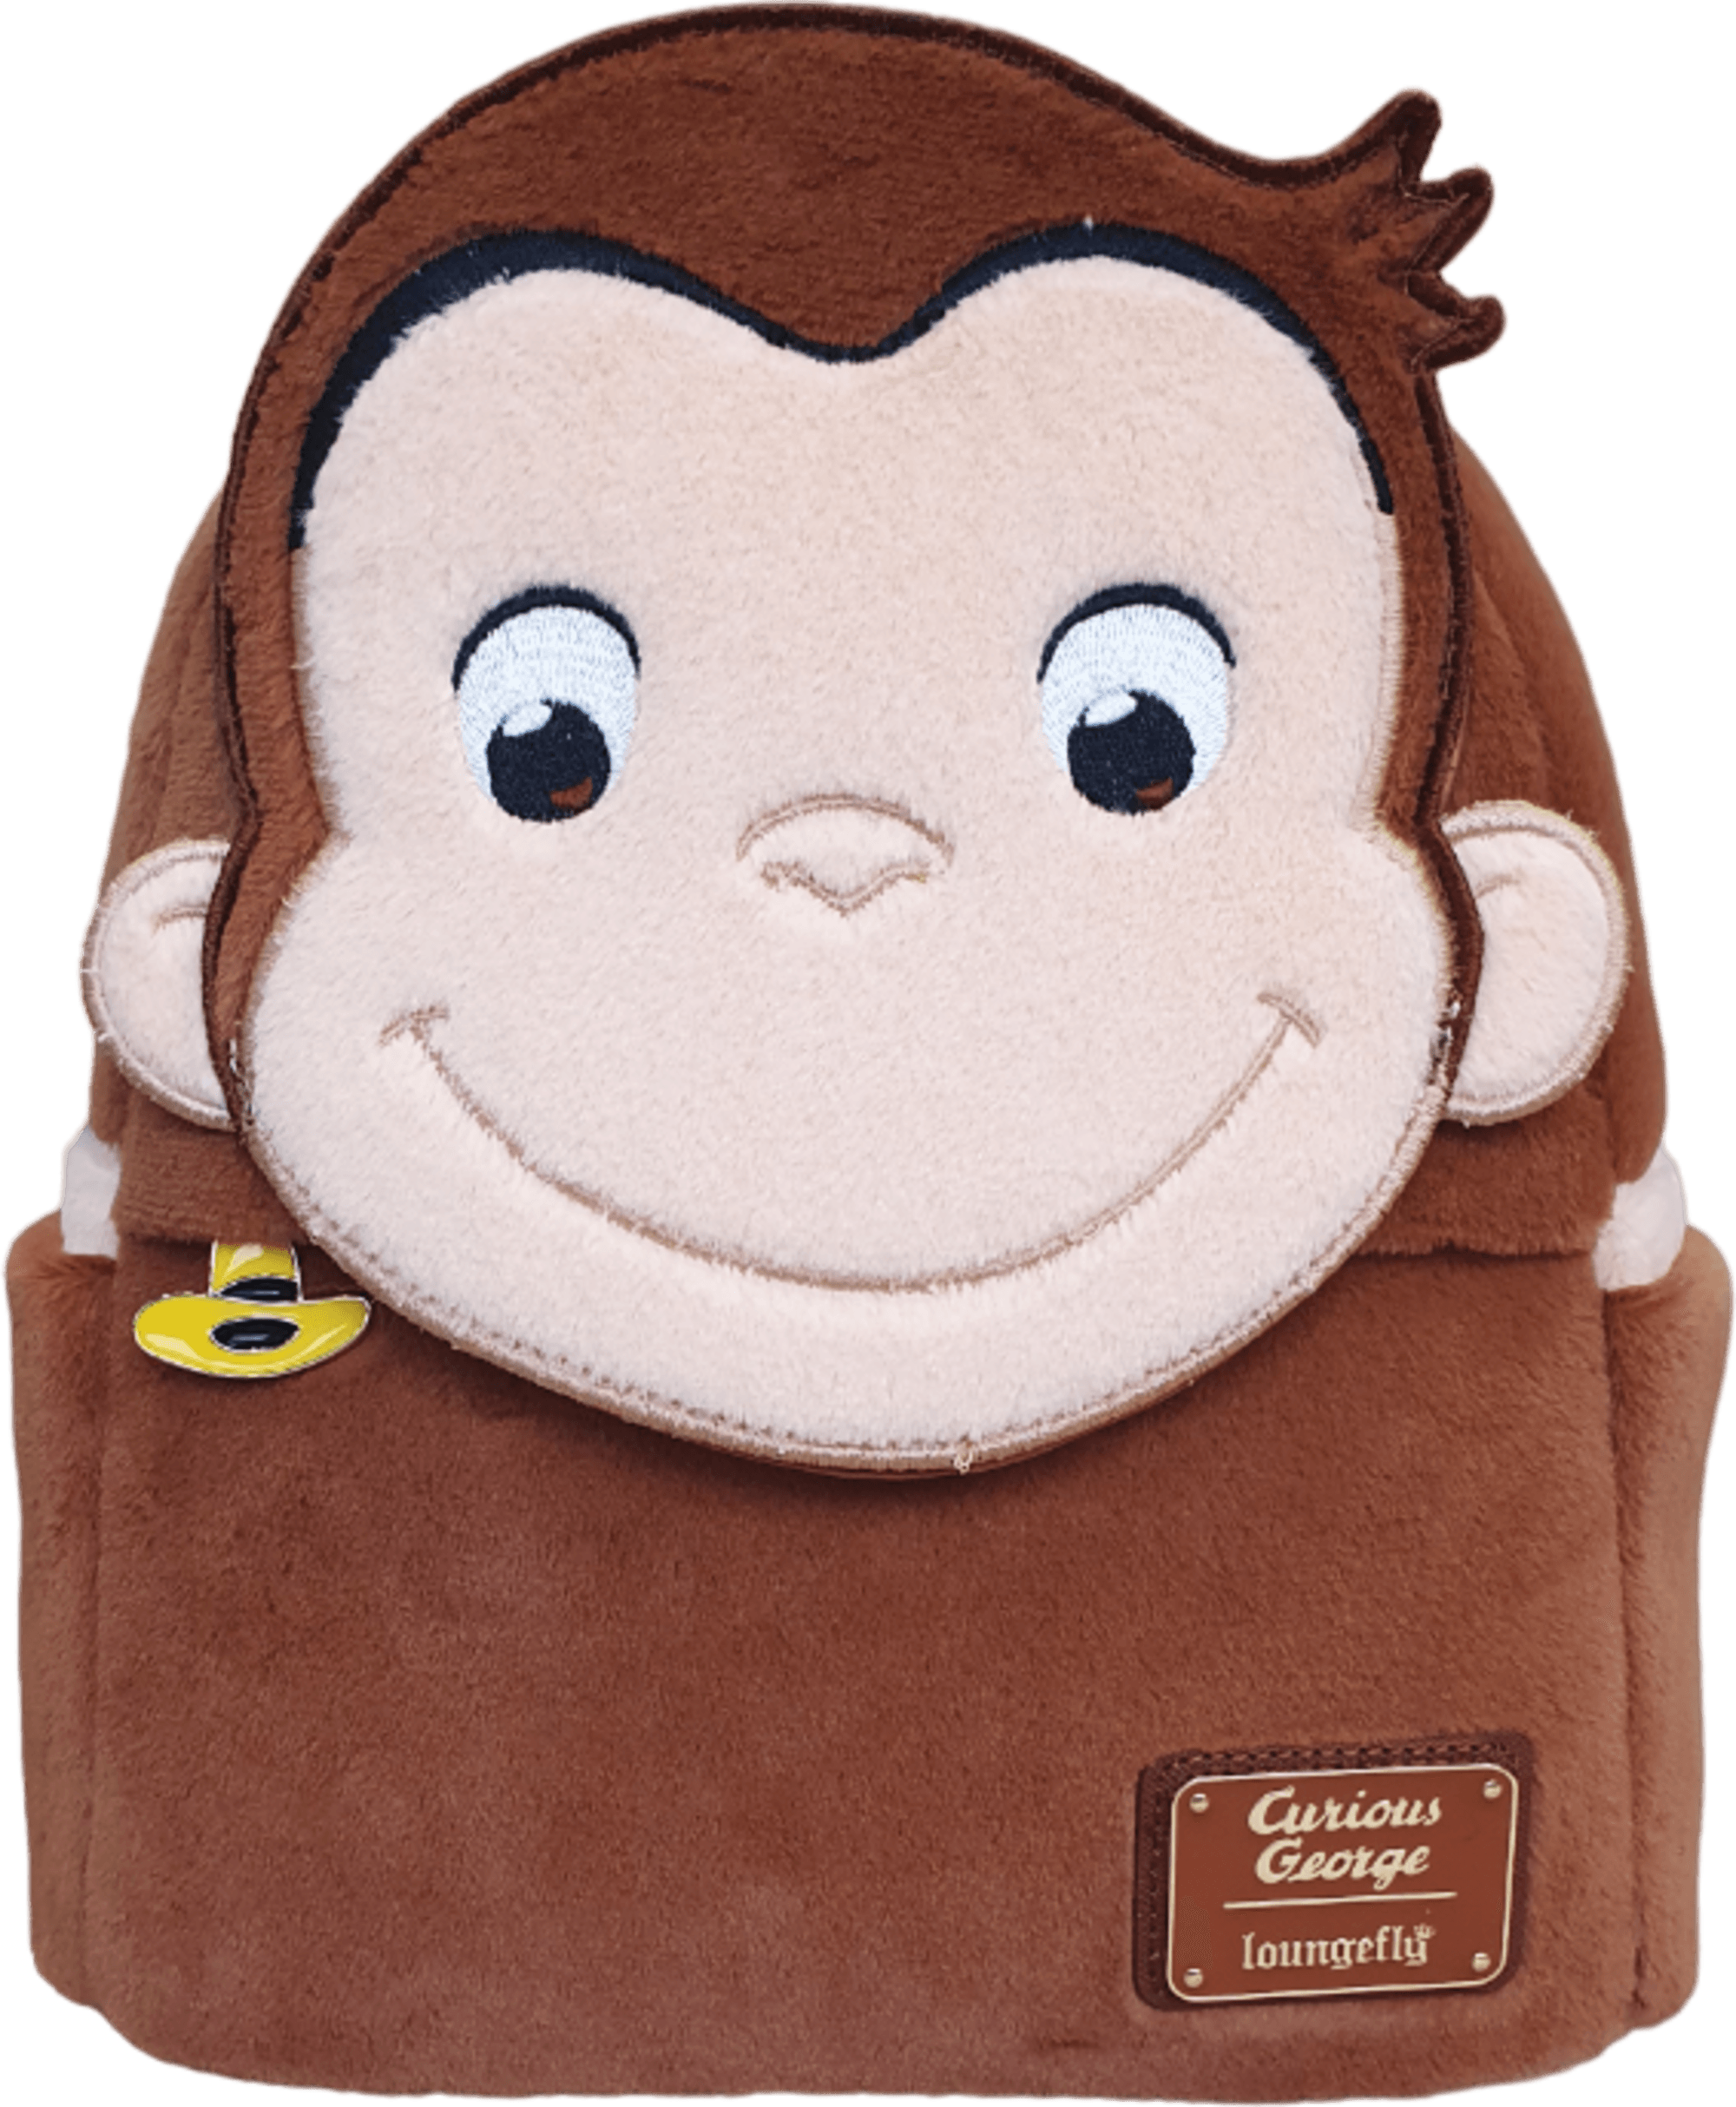 LOUCGBK0001 Curious George - Curious George US Exclusive Plush Cosplay Mini Backpack [RS] - Loungefly - Titan Pop Culture